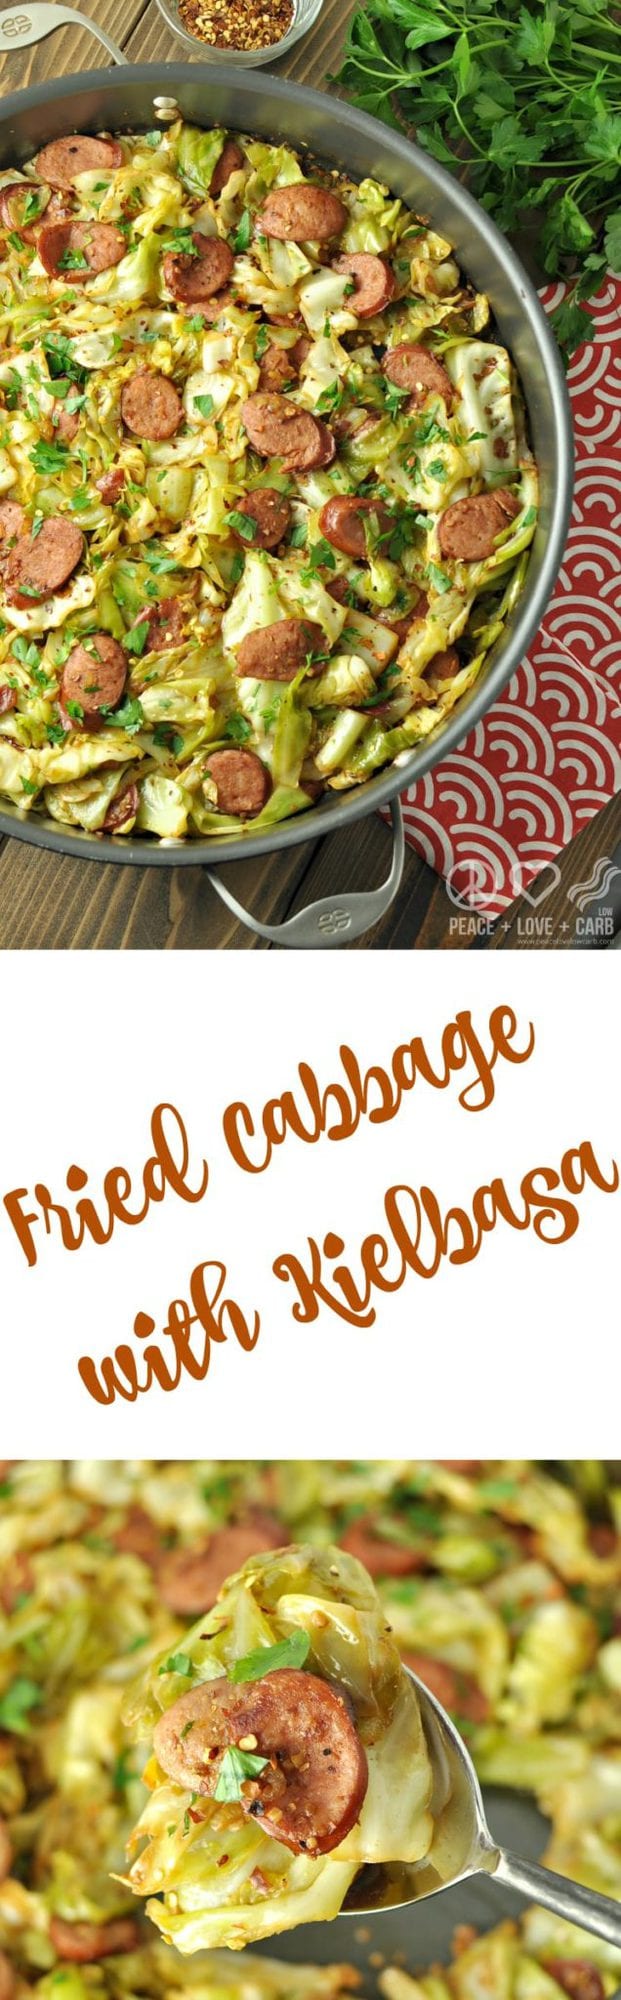 Fried Cabbage with Kielbasa - Low Carb, Gluten Free Peace Love and Low Carb